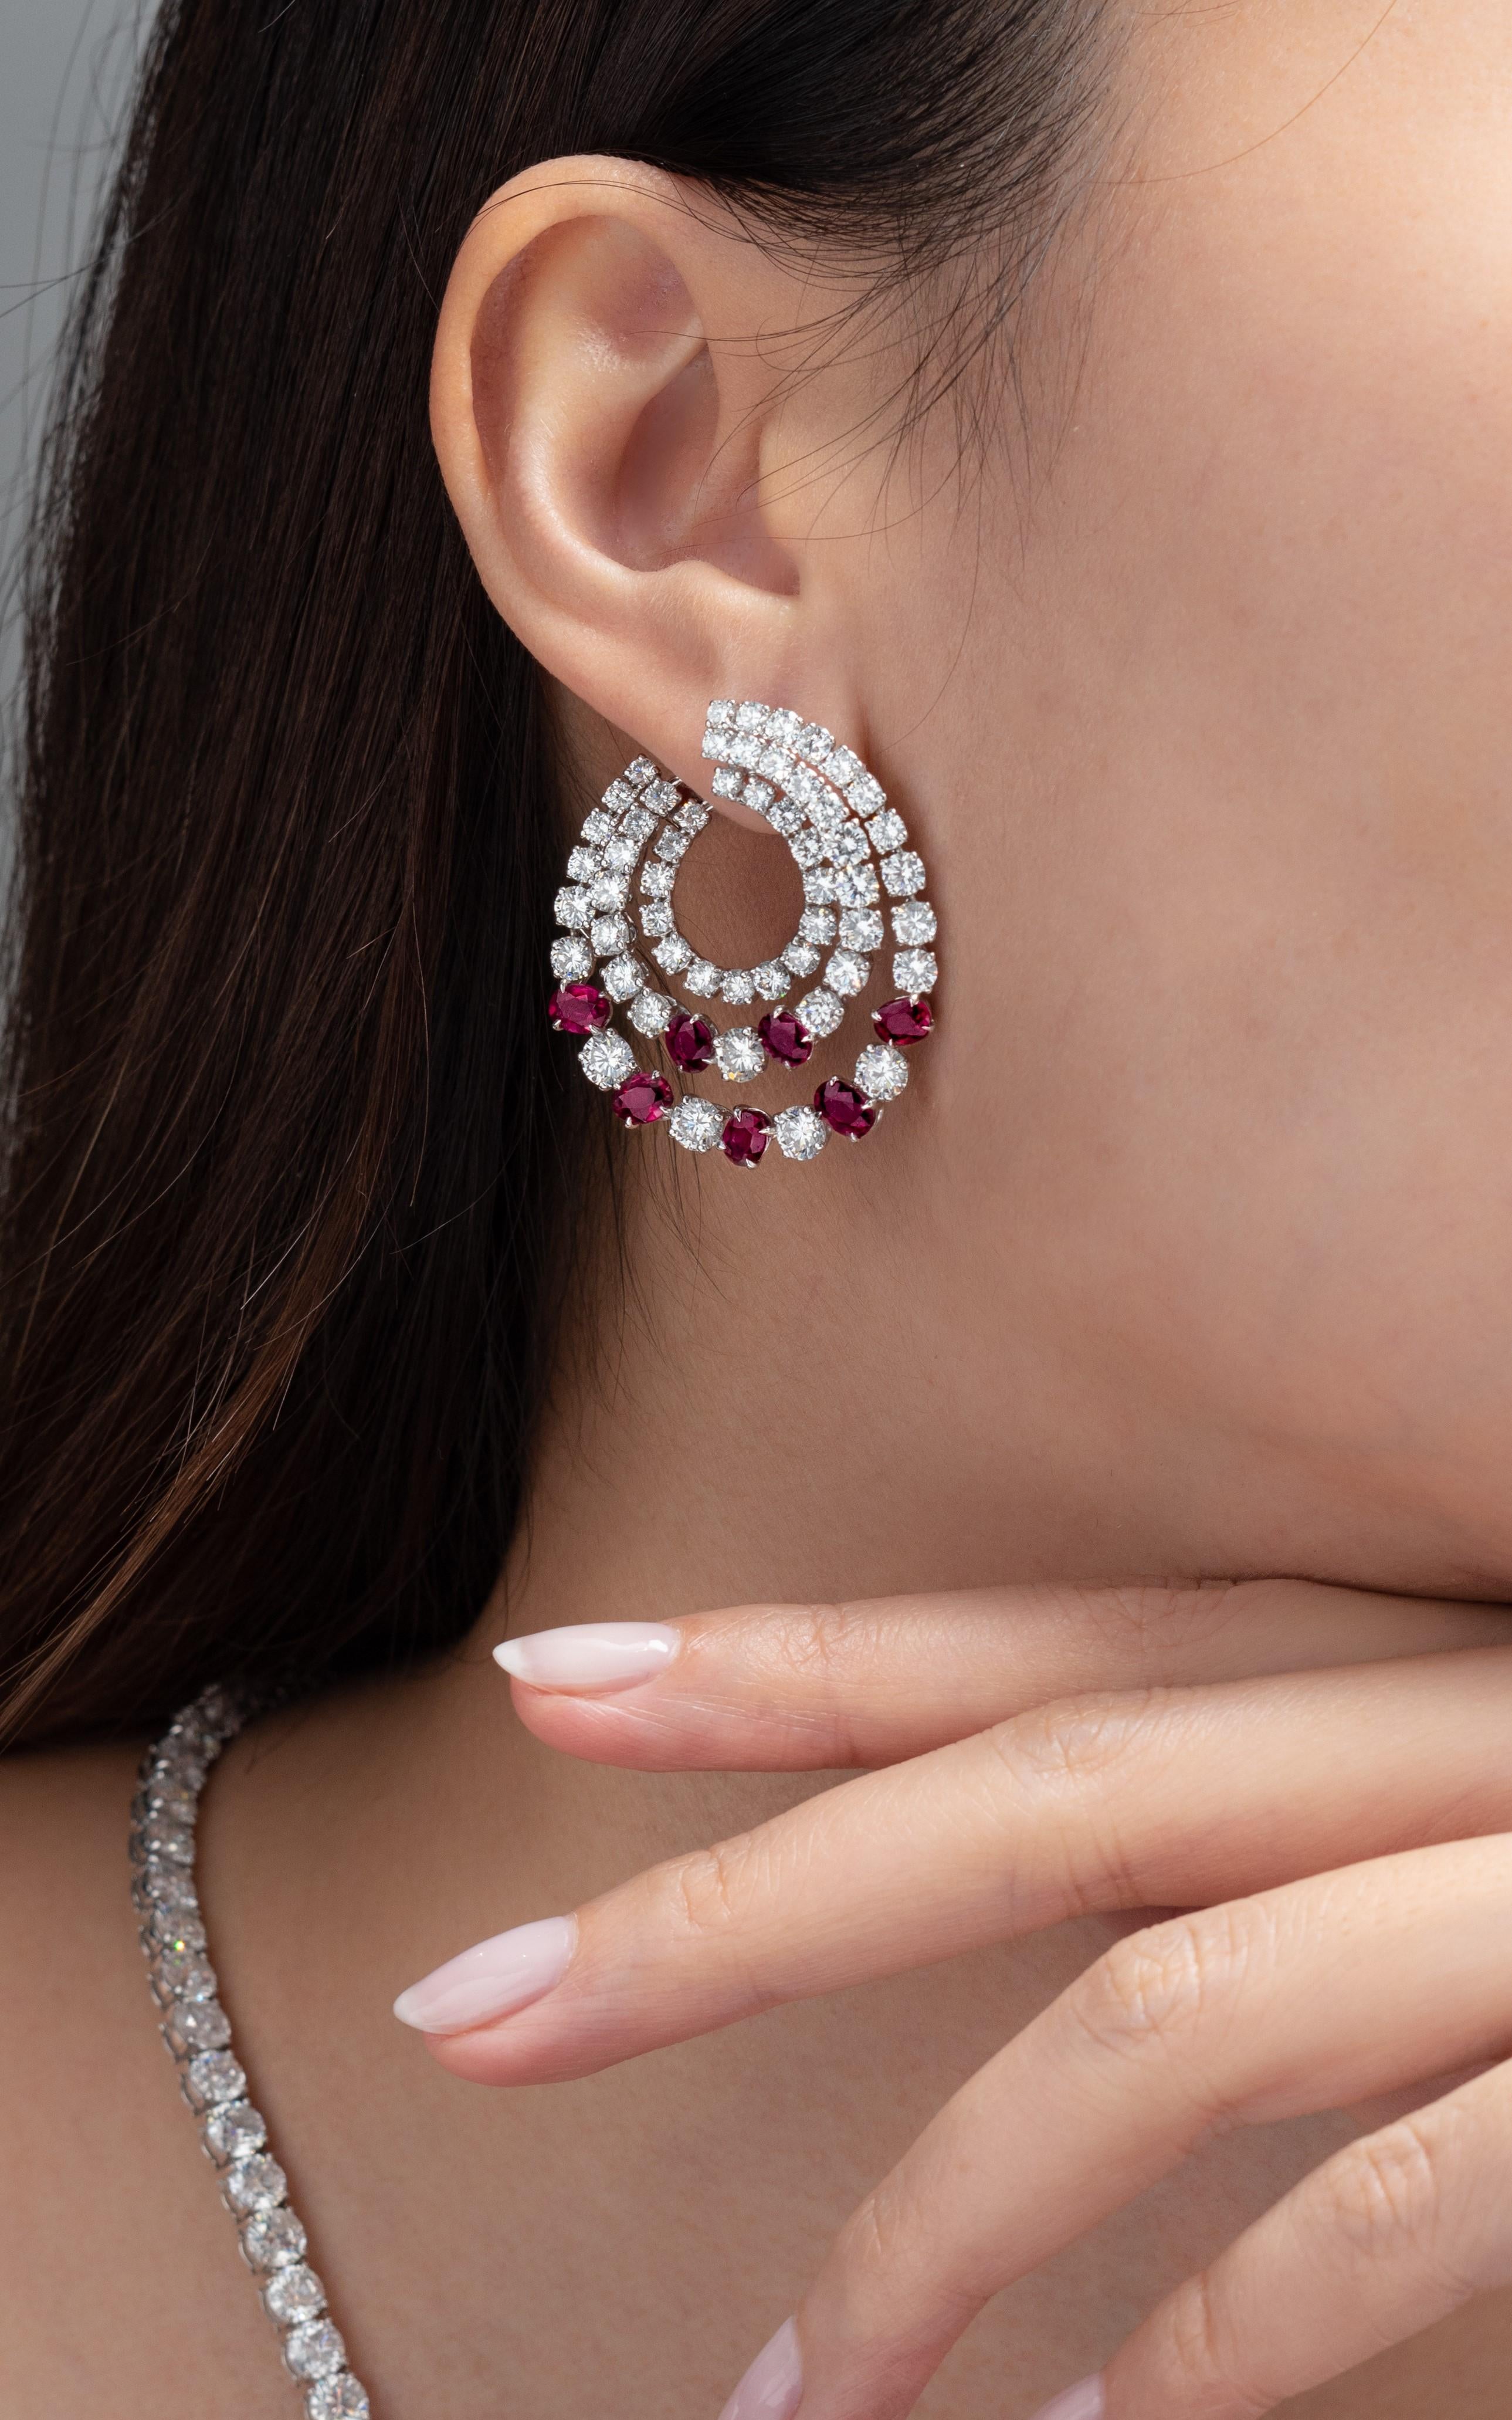 If you're going for the wow factor, these earrings are just that. They illuminate with sparkle and fire. These Vihari Jewels hoop earrings features 3 rows of diamonds and rubies. There are a total of 106 round brilliant diamonds totaling 11.48